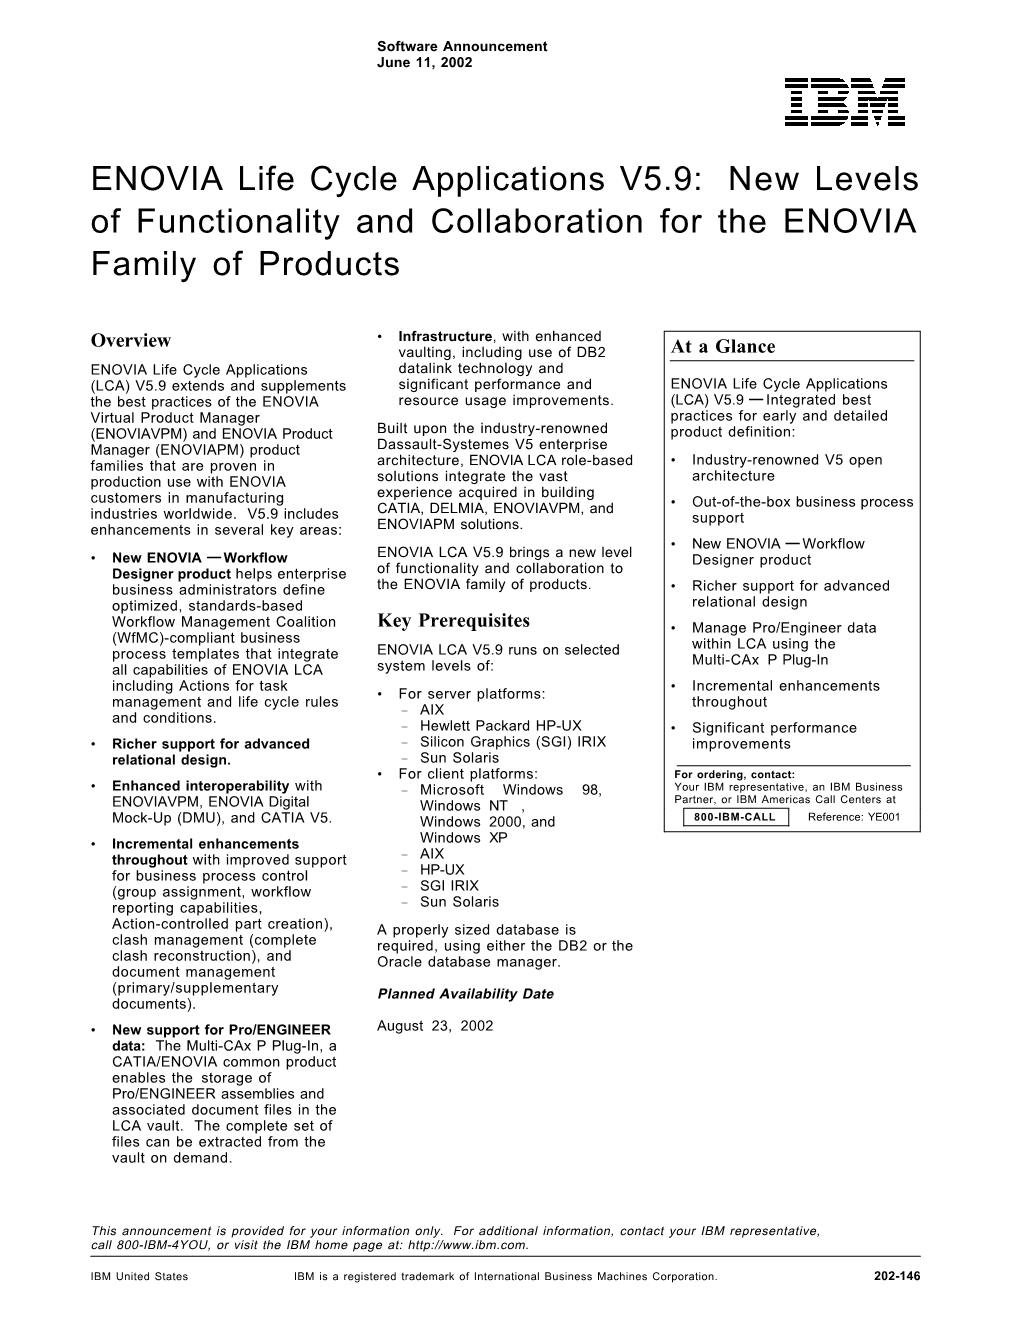 ENOVIA Life Cycle Applications V5.9: New Levels of Functionality and Collaboration for the ENOVIA Family of Products